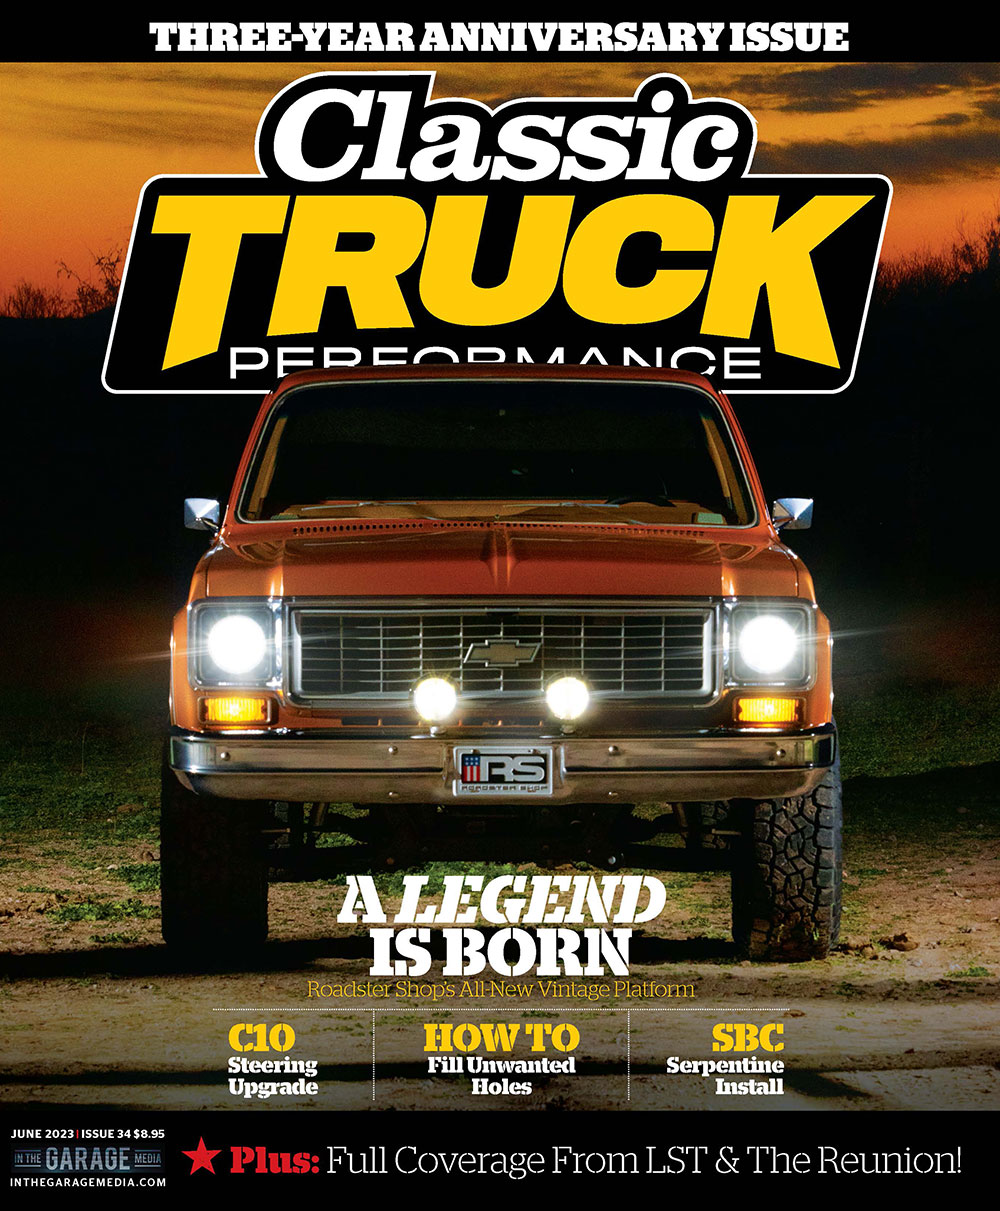 Classic Truck Performance June 2023 cover